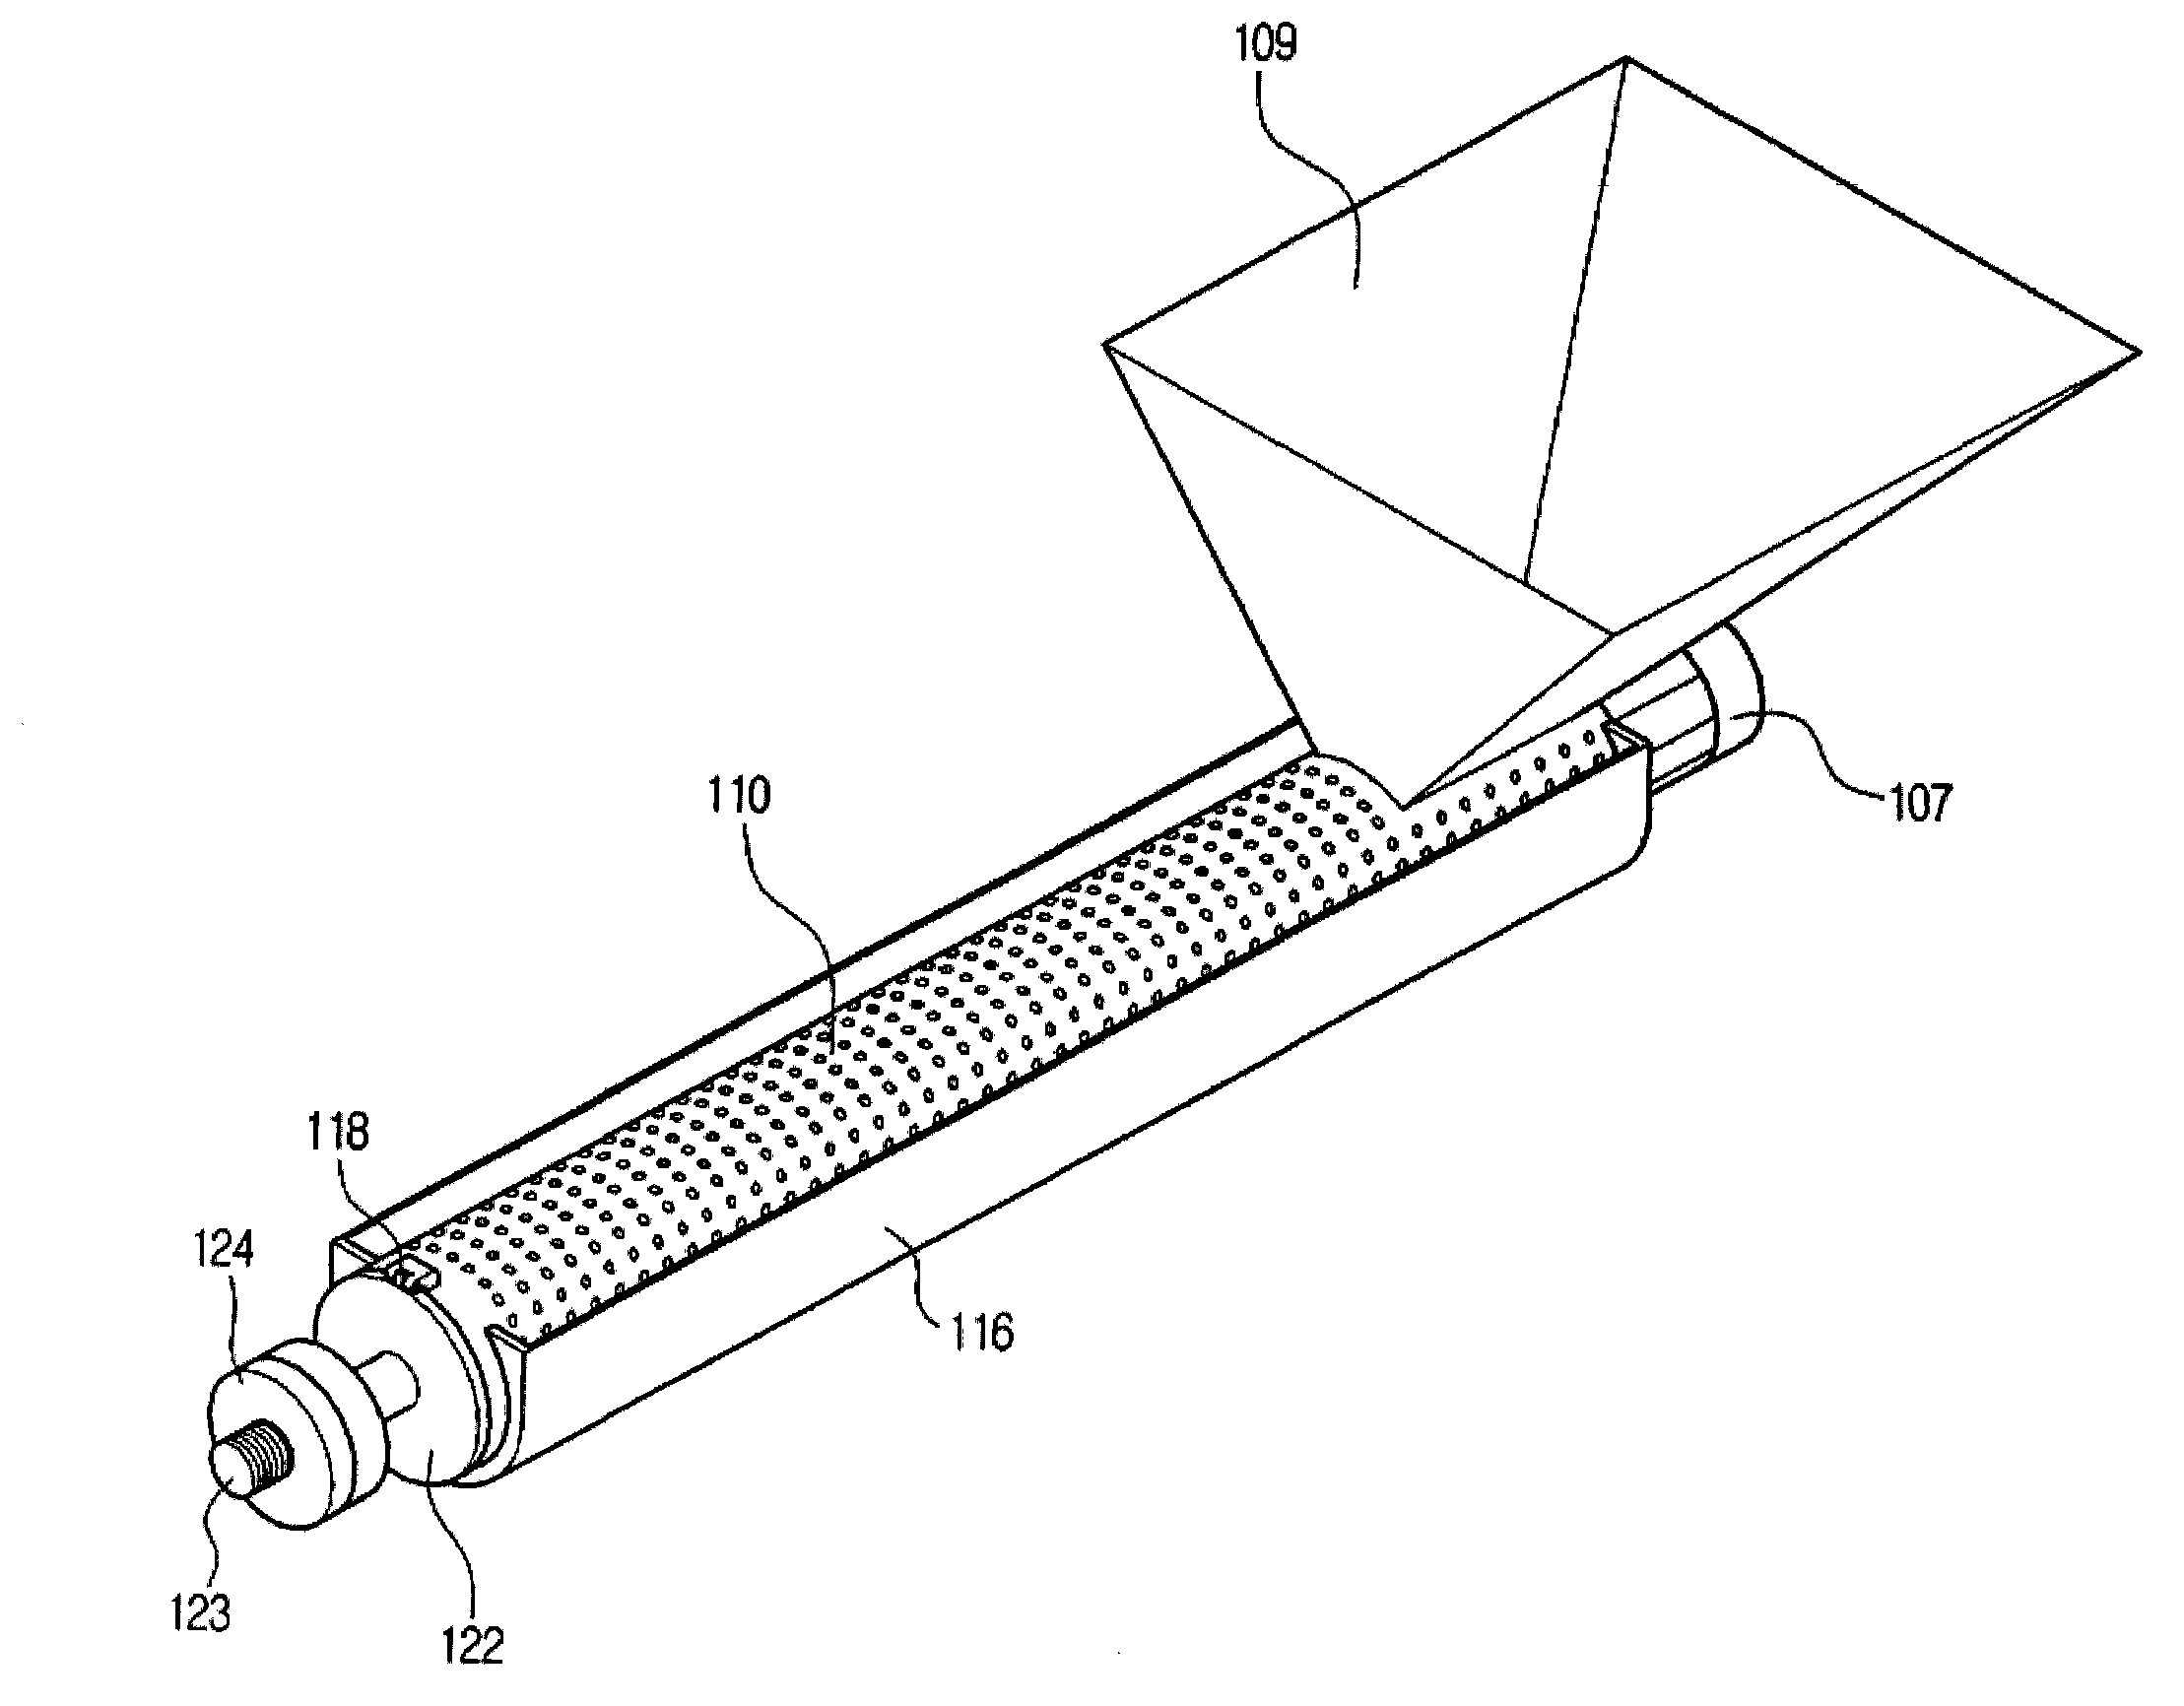 Food waste treatment device